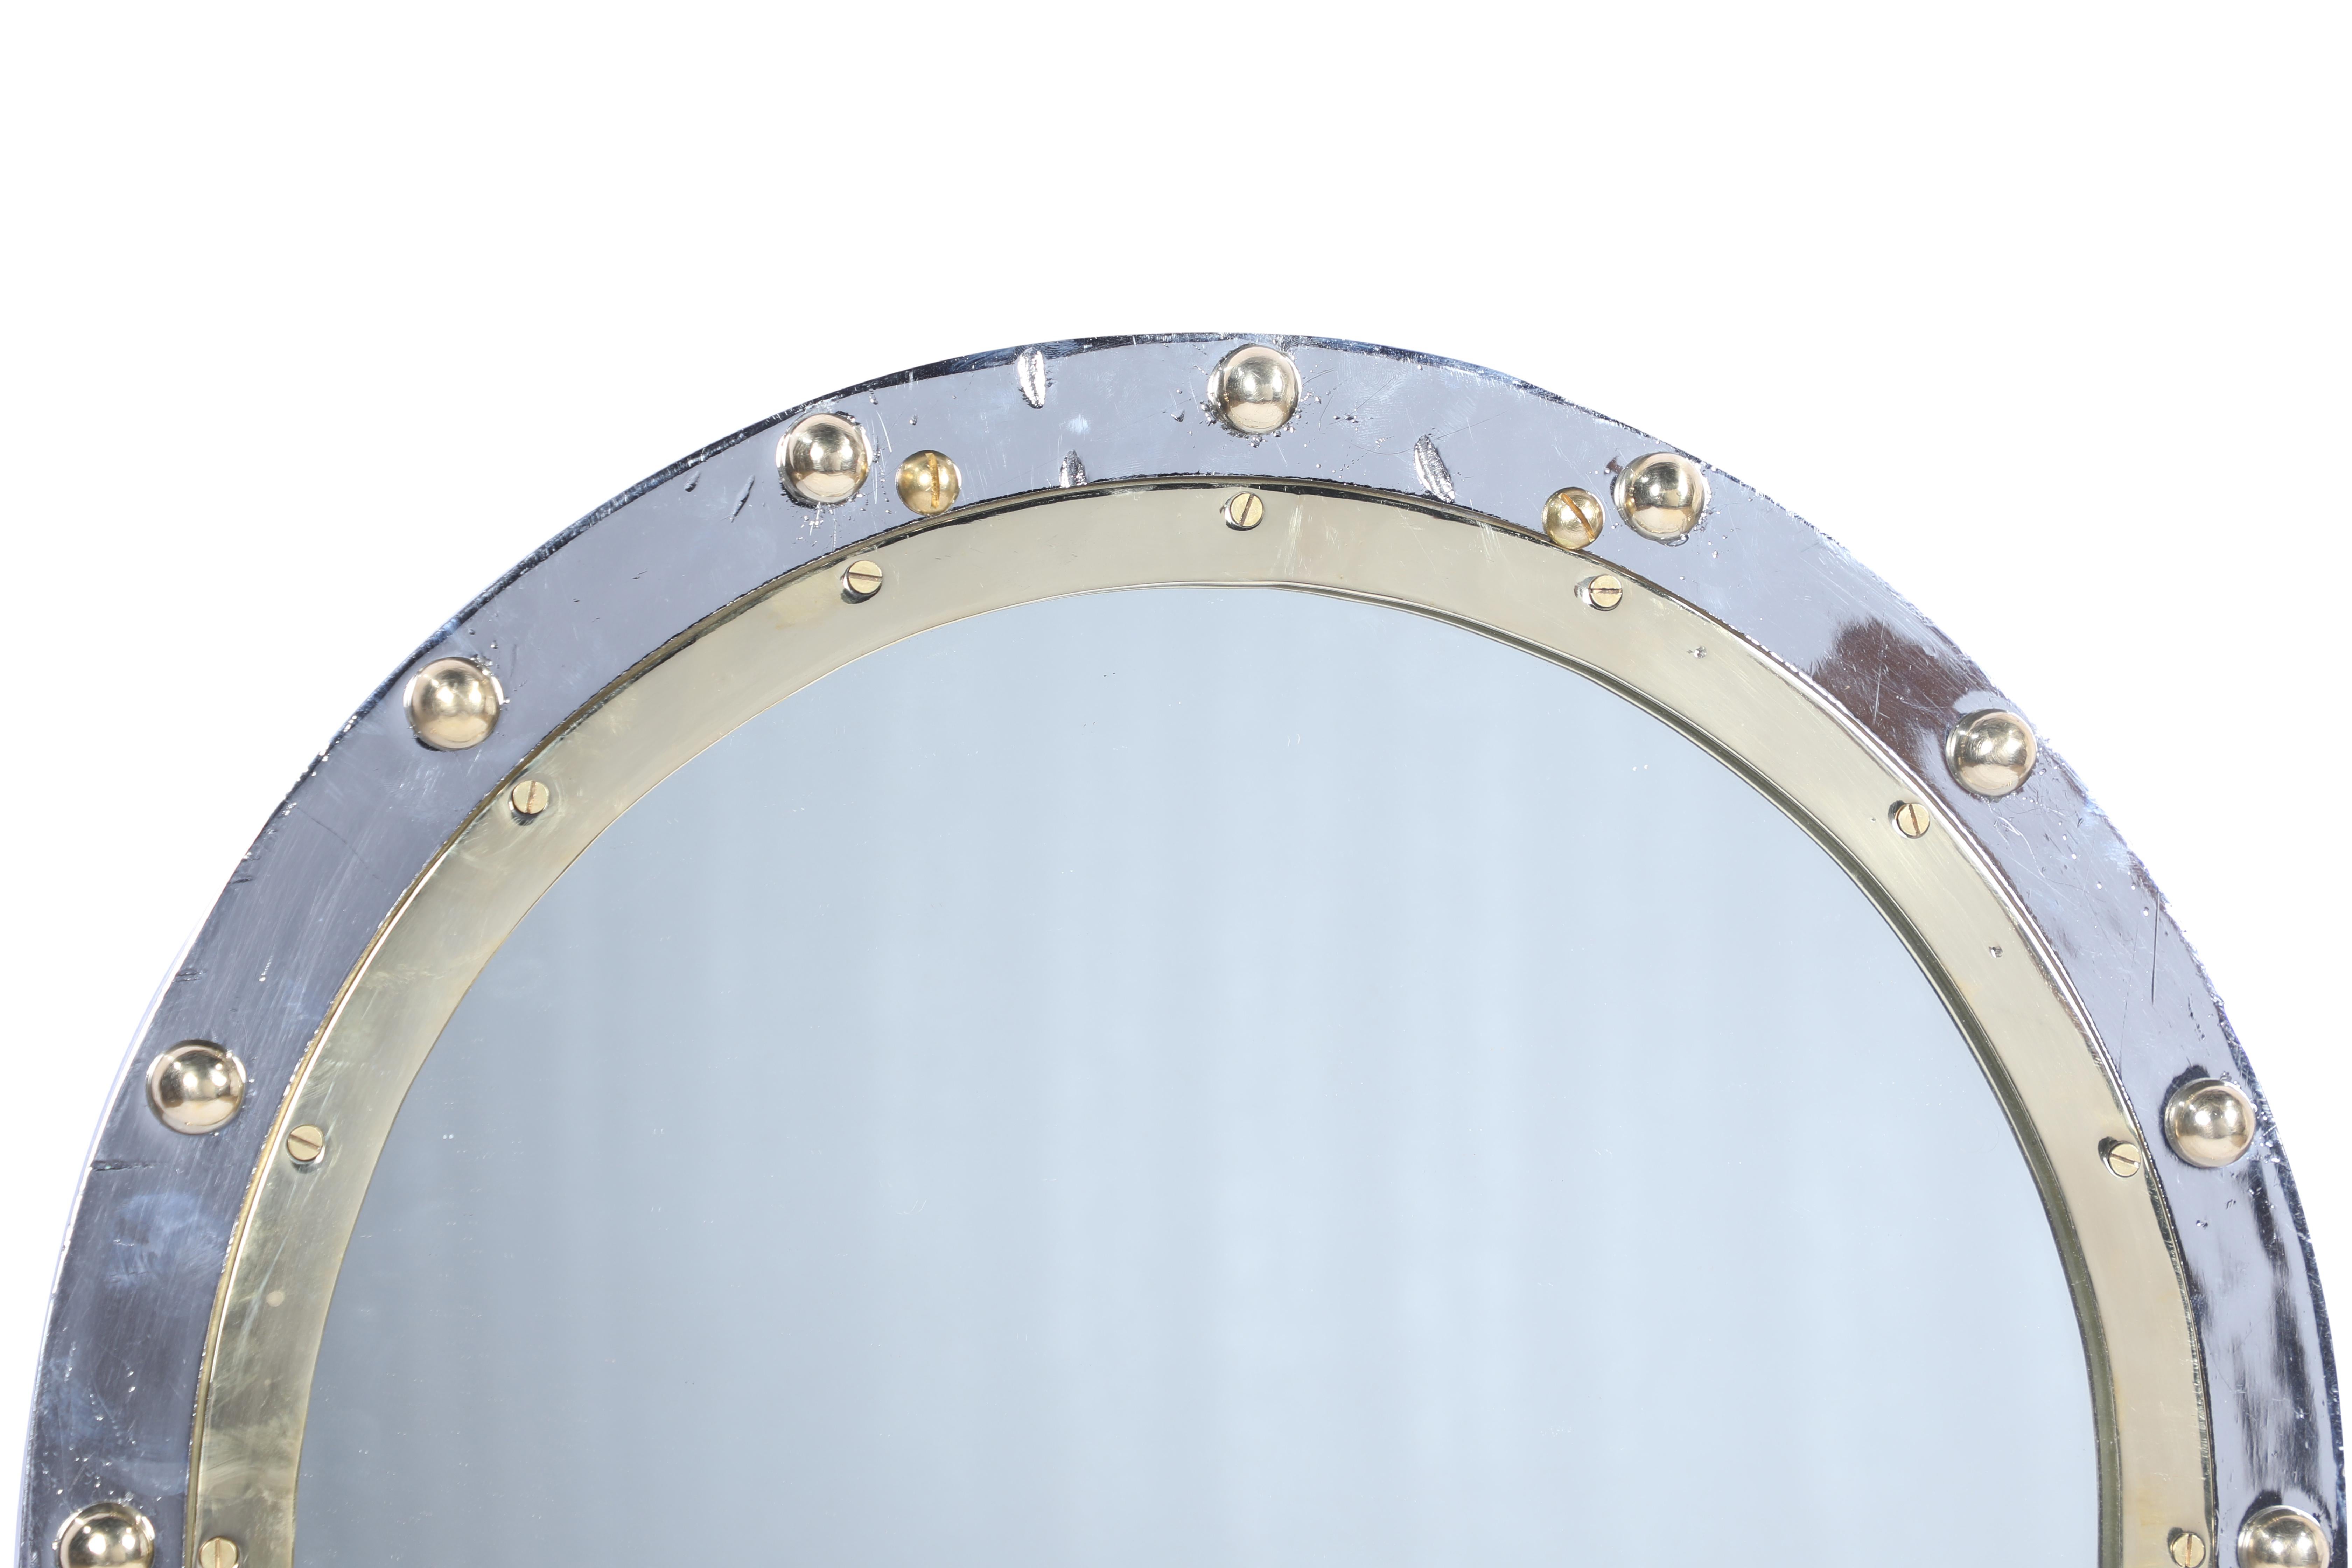 From a decommissioned ship, an oval fixed porthole window in a combination of chrome converted by us to a mirror. Classic styling. Rivets were added as these come out when taken off ships. Two brass supports on the back for hanging and metal back to